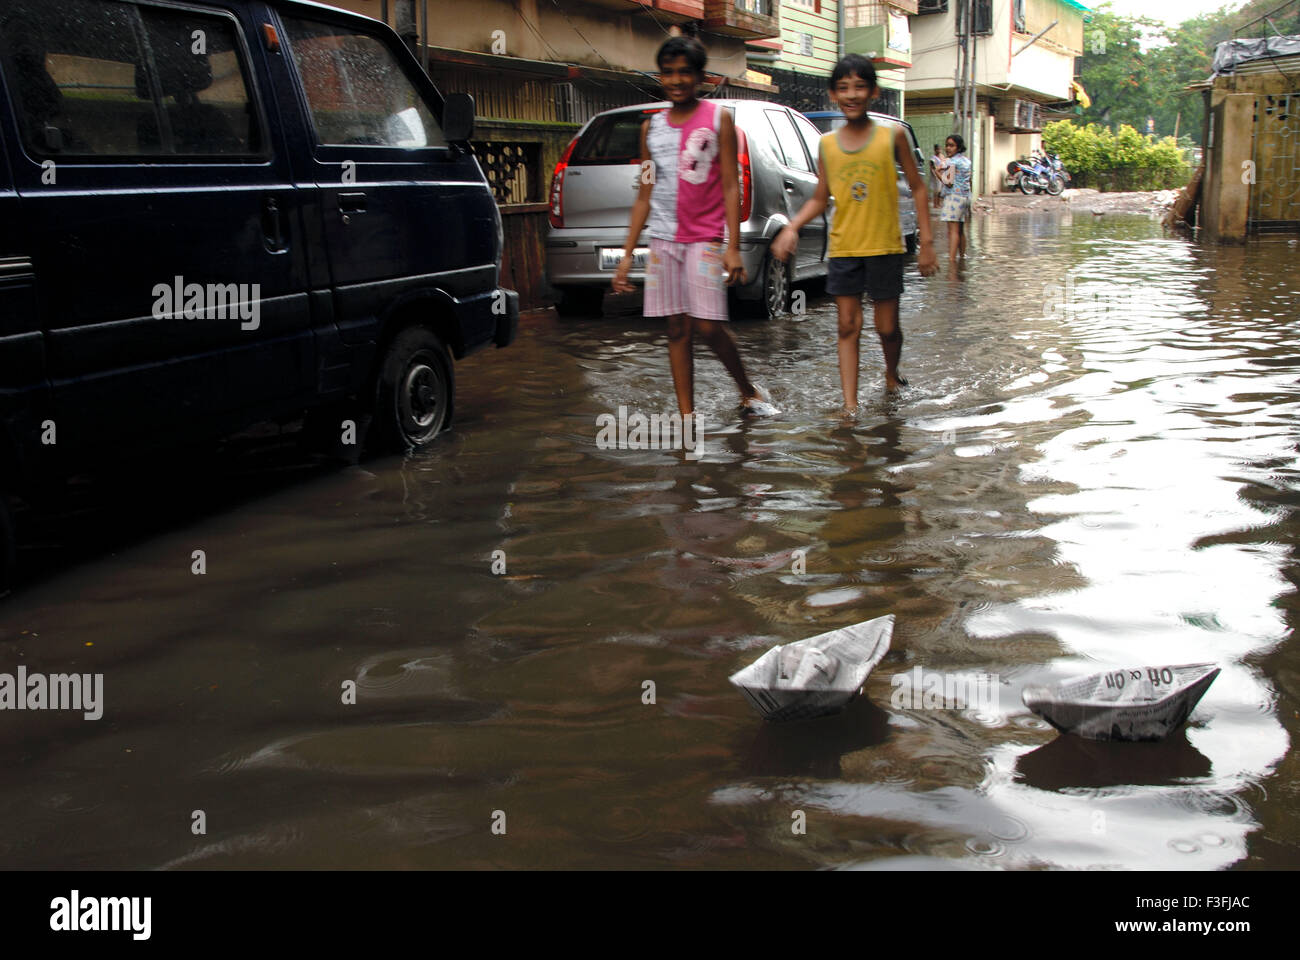 Children sailing paper boats on flooded street Stock Photo